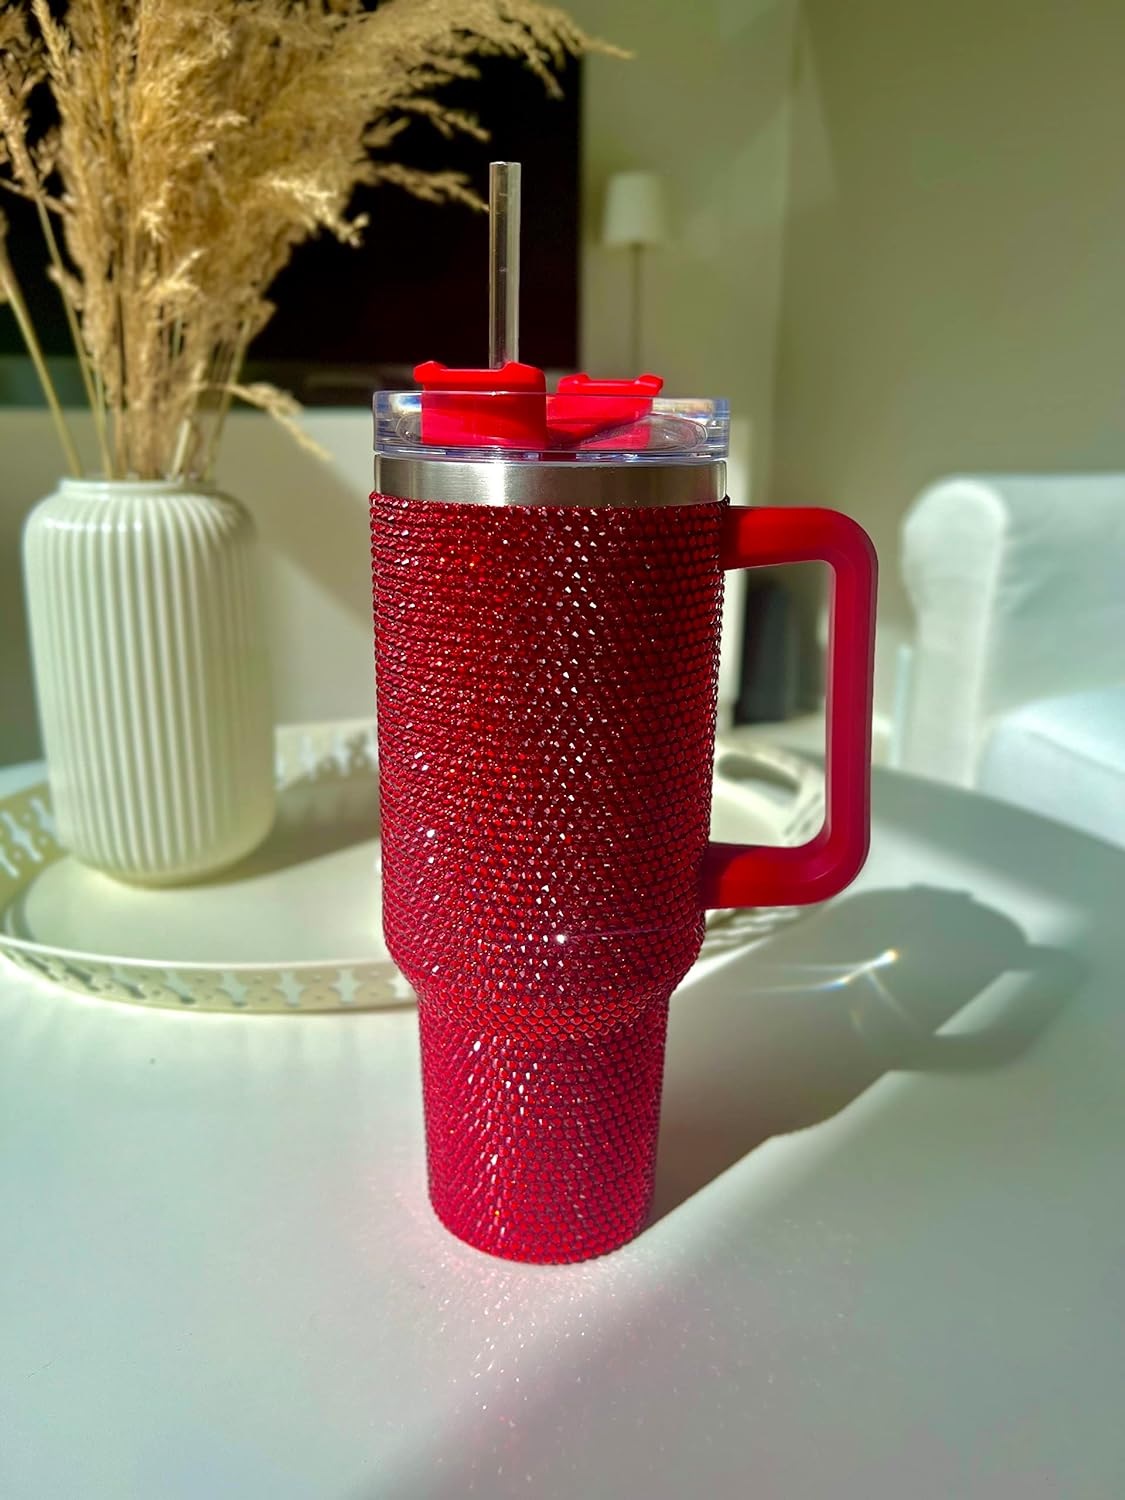 Studded Travel Mug 1200ml With Lid and Straw Insulated Stainless Steel